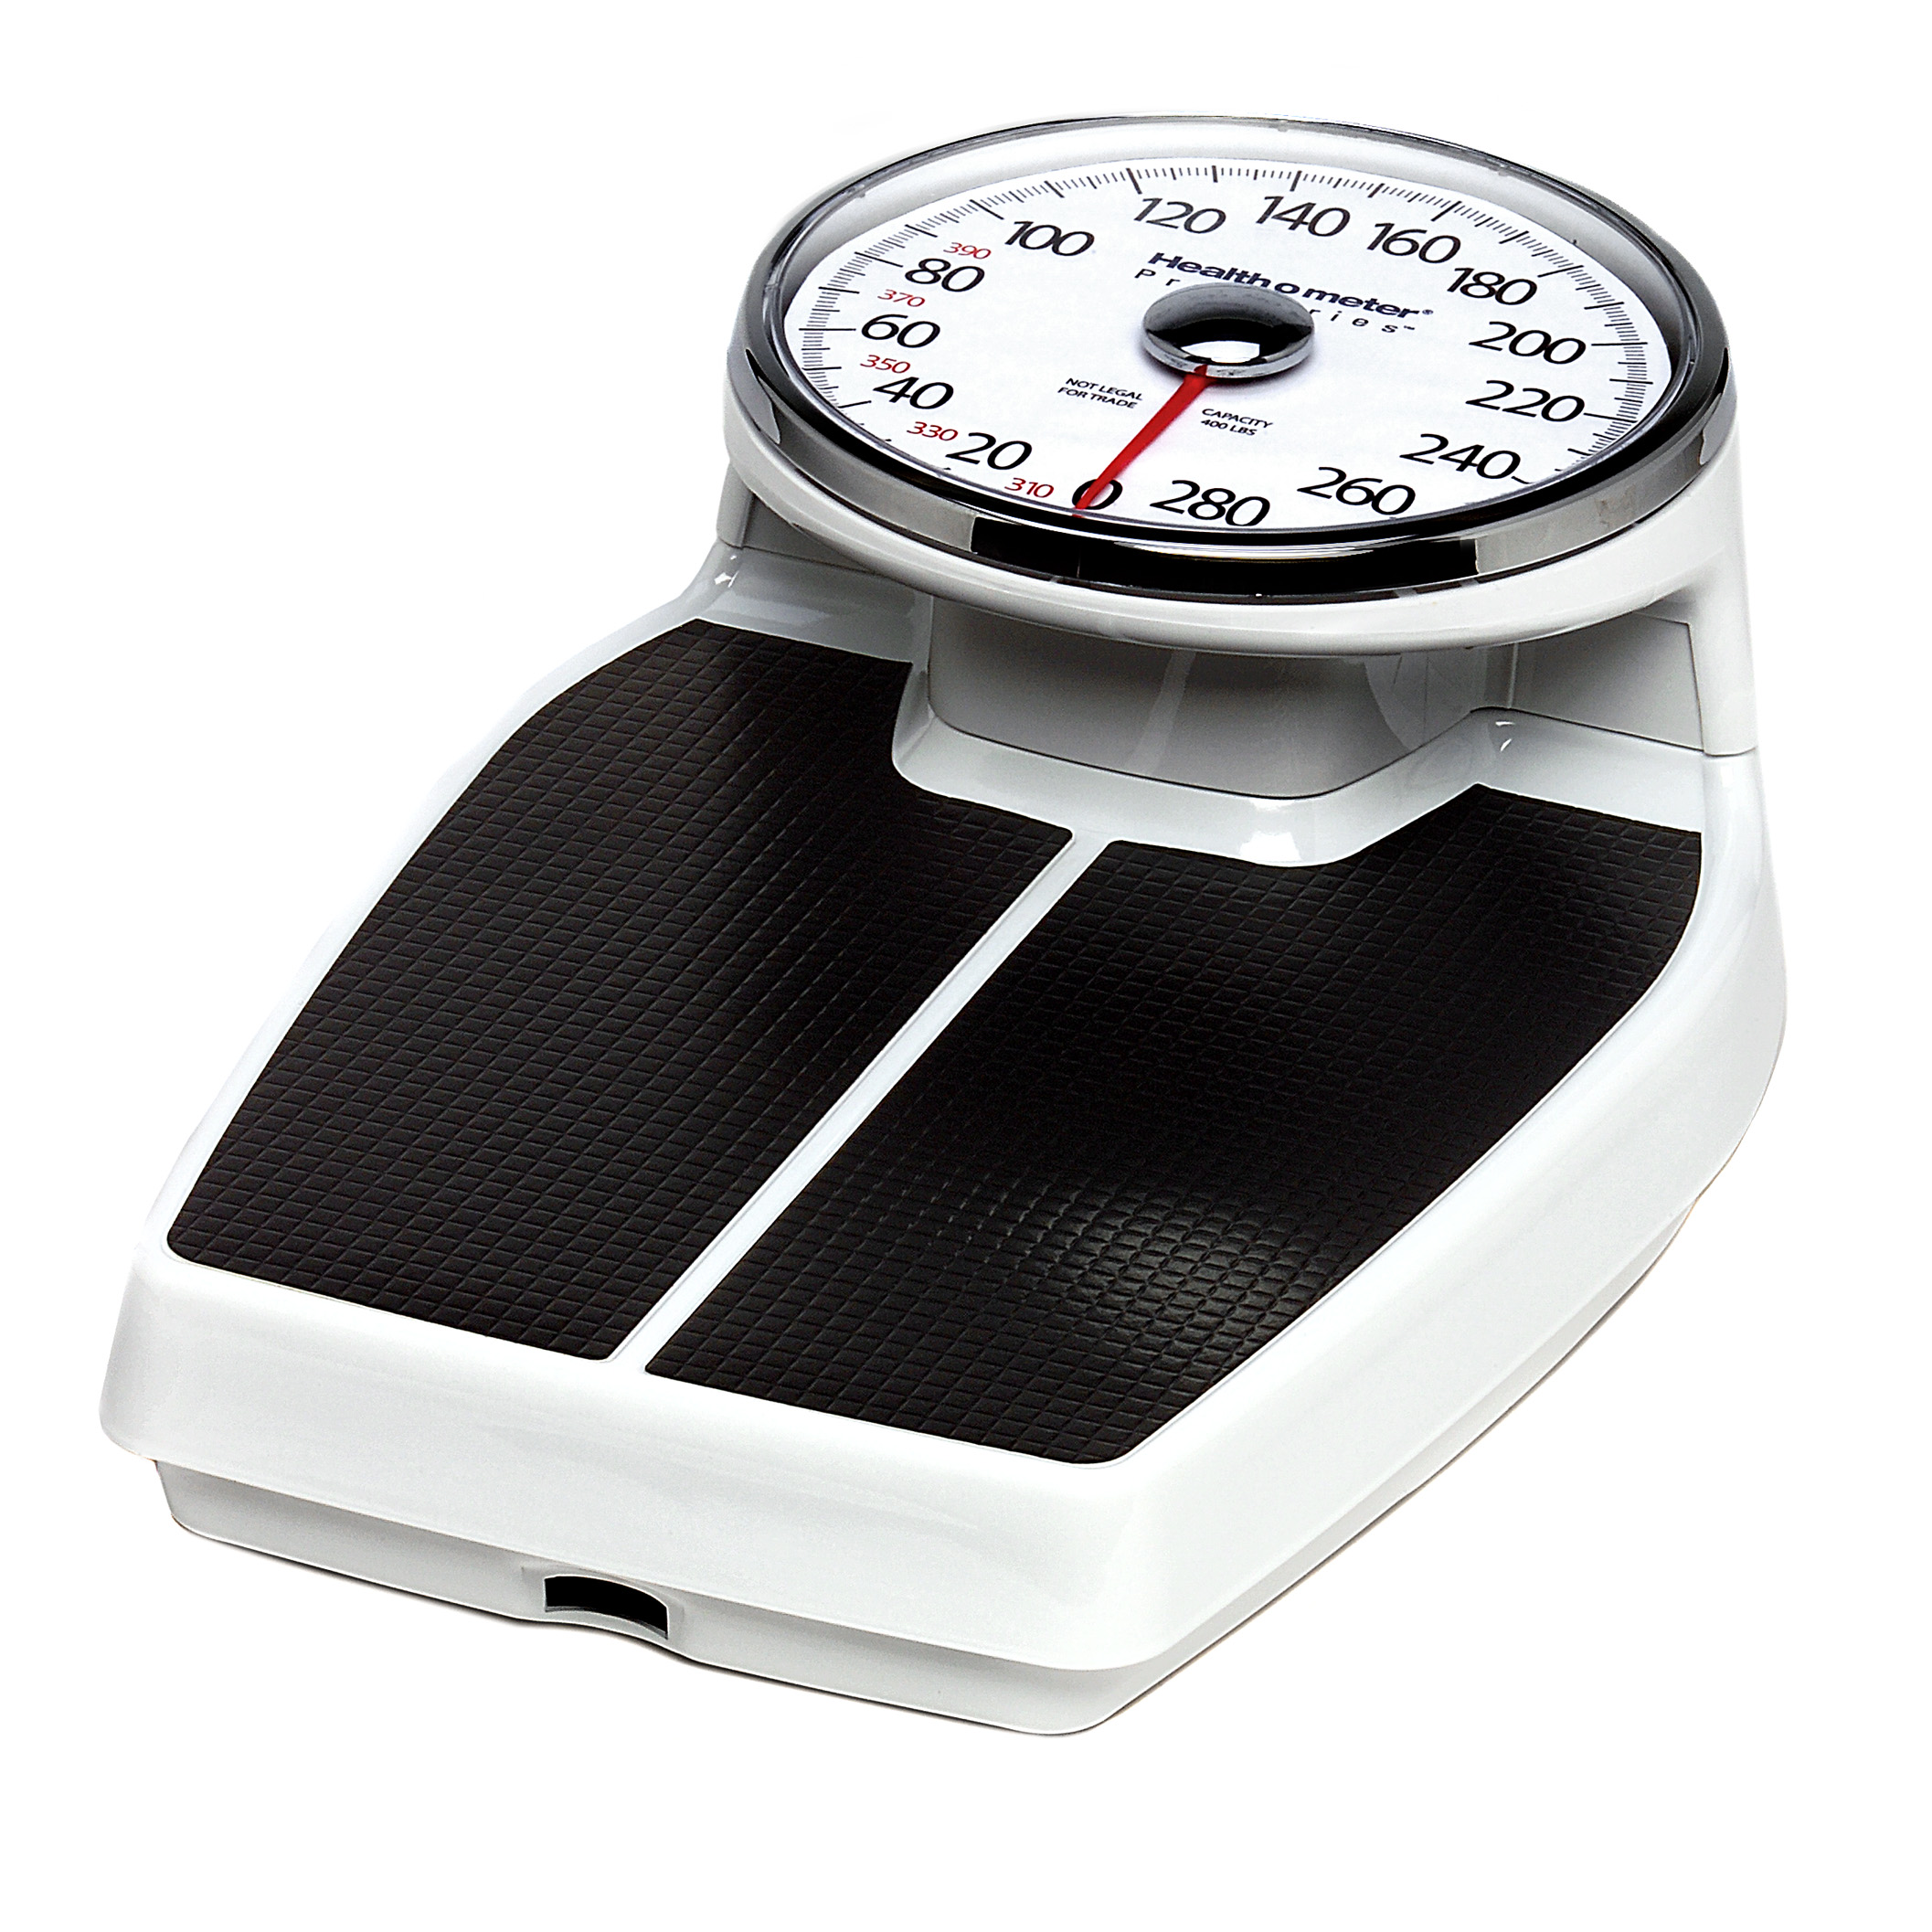 Health-o-meter Pro Series Model 160LB Extra Large Dial/Platform Scale 400  lb Max